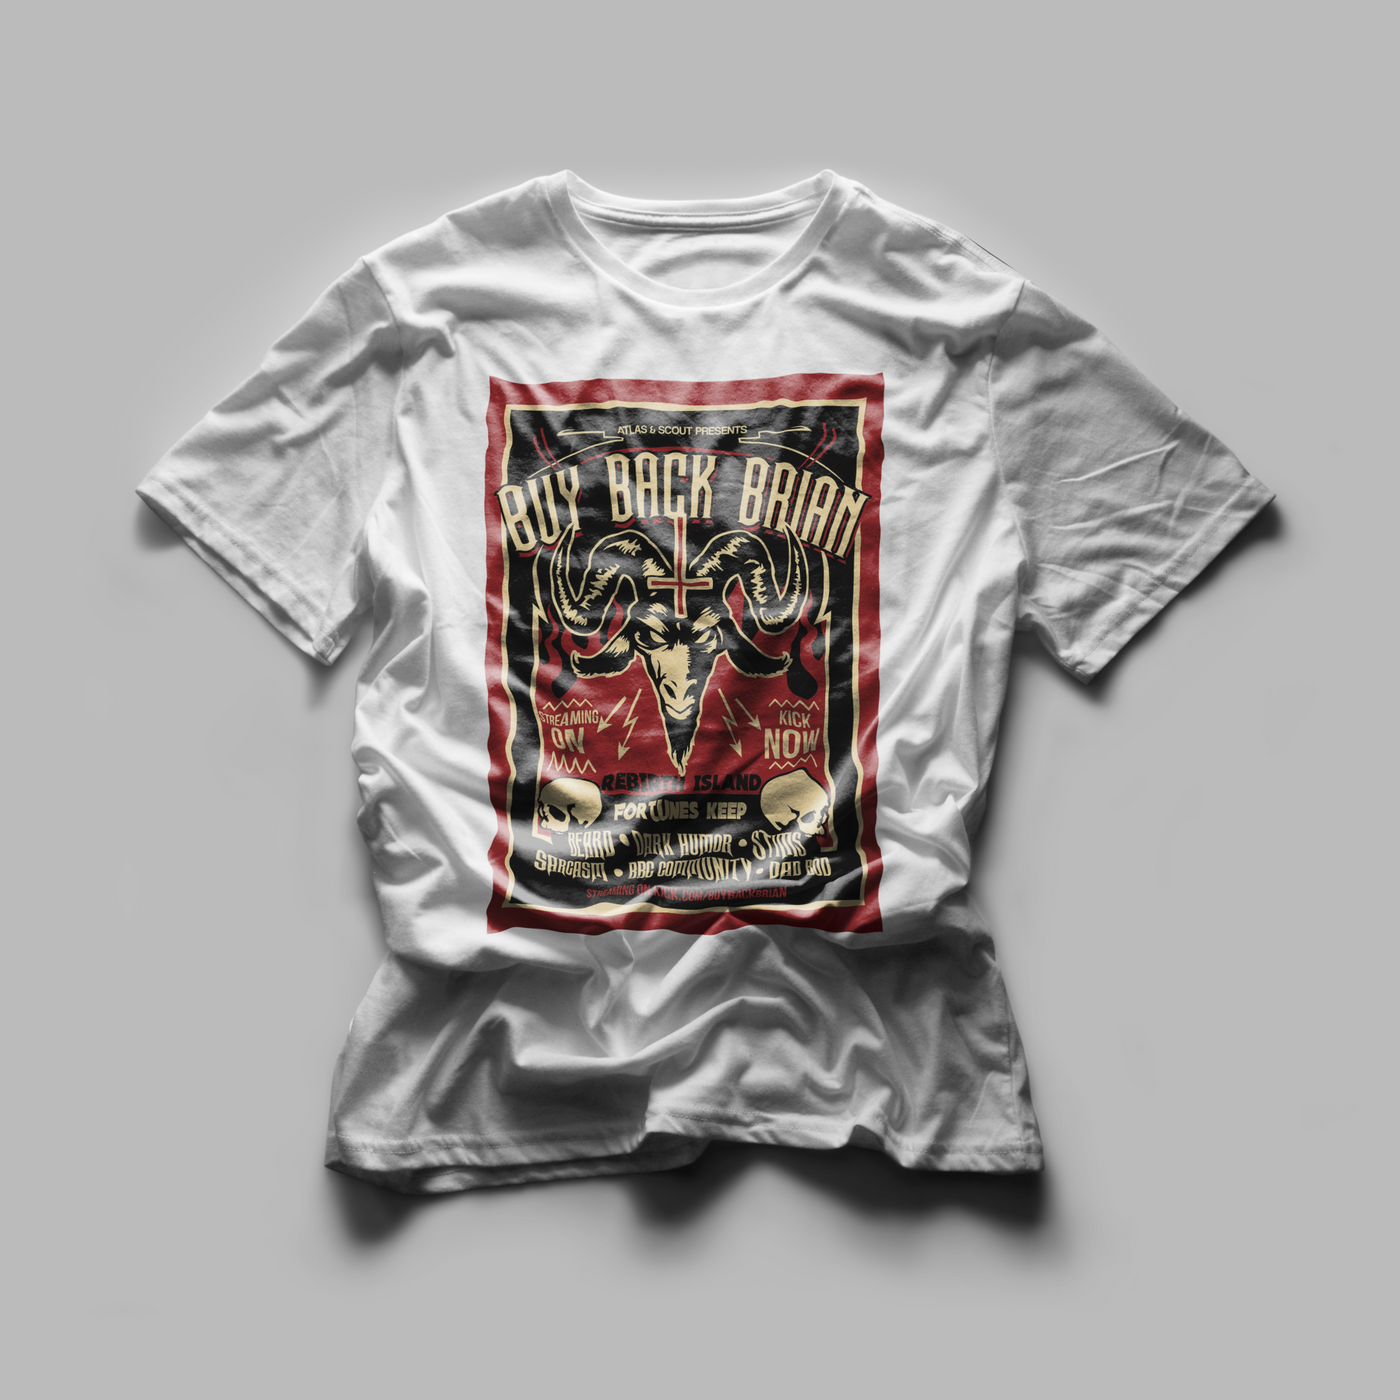 BuyBackBrian - Goat Show Poster - Tee